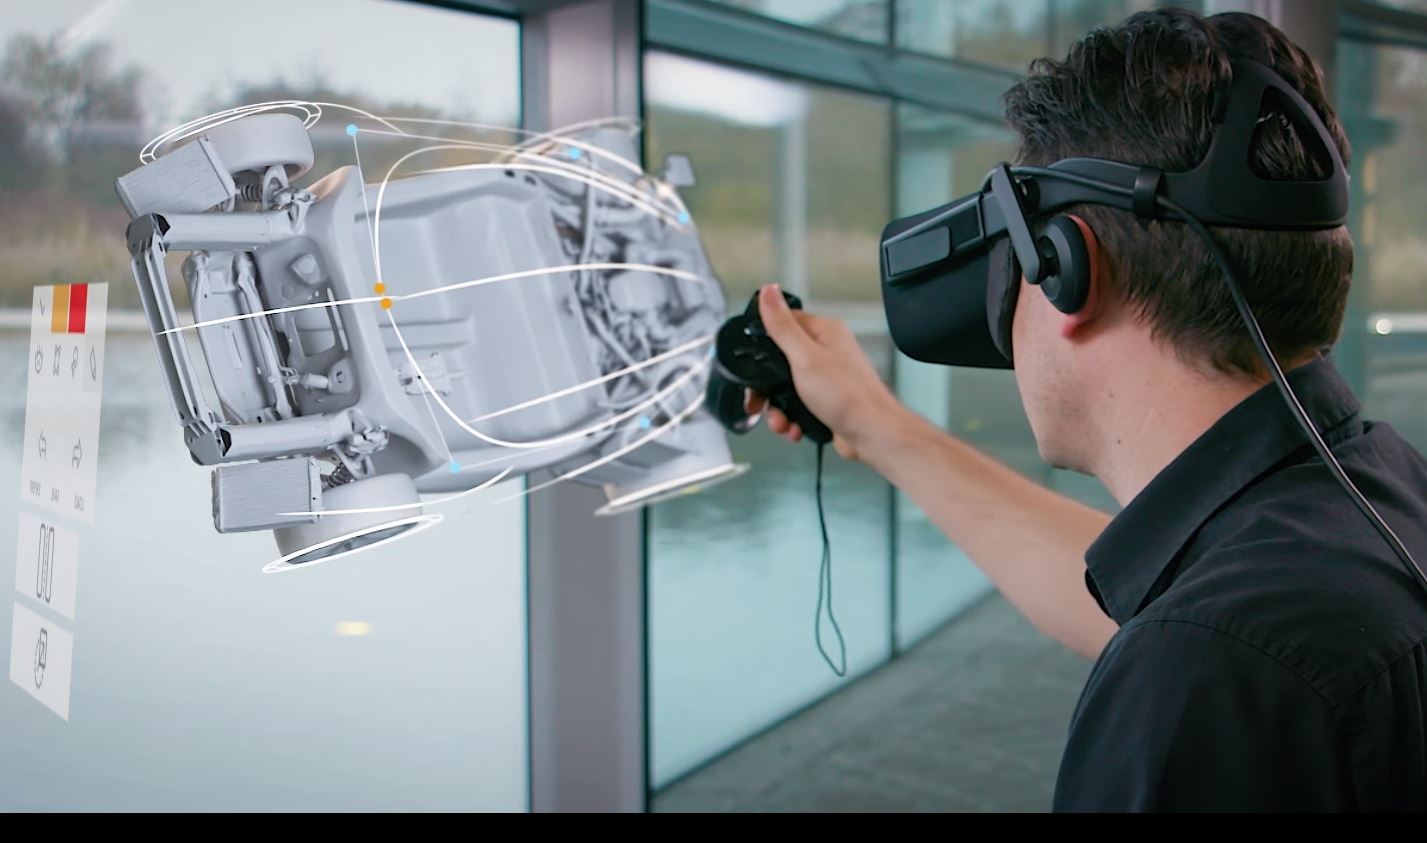 At GDC 2019 you'll see how McLaren uses VR to fast-track supercar design | News | GDC | Game Conference